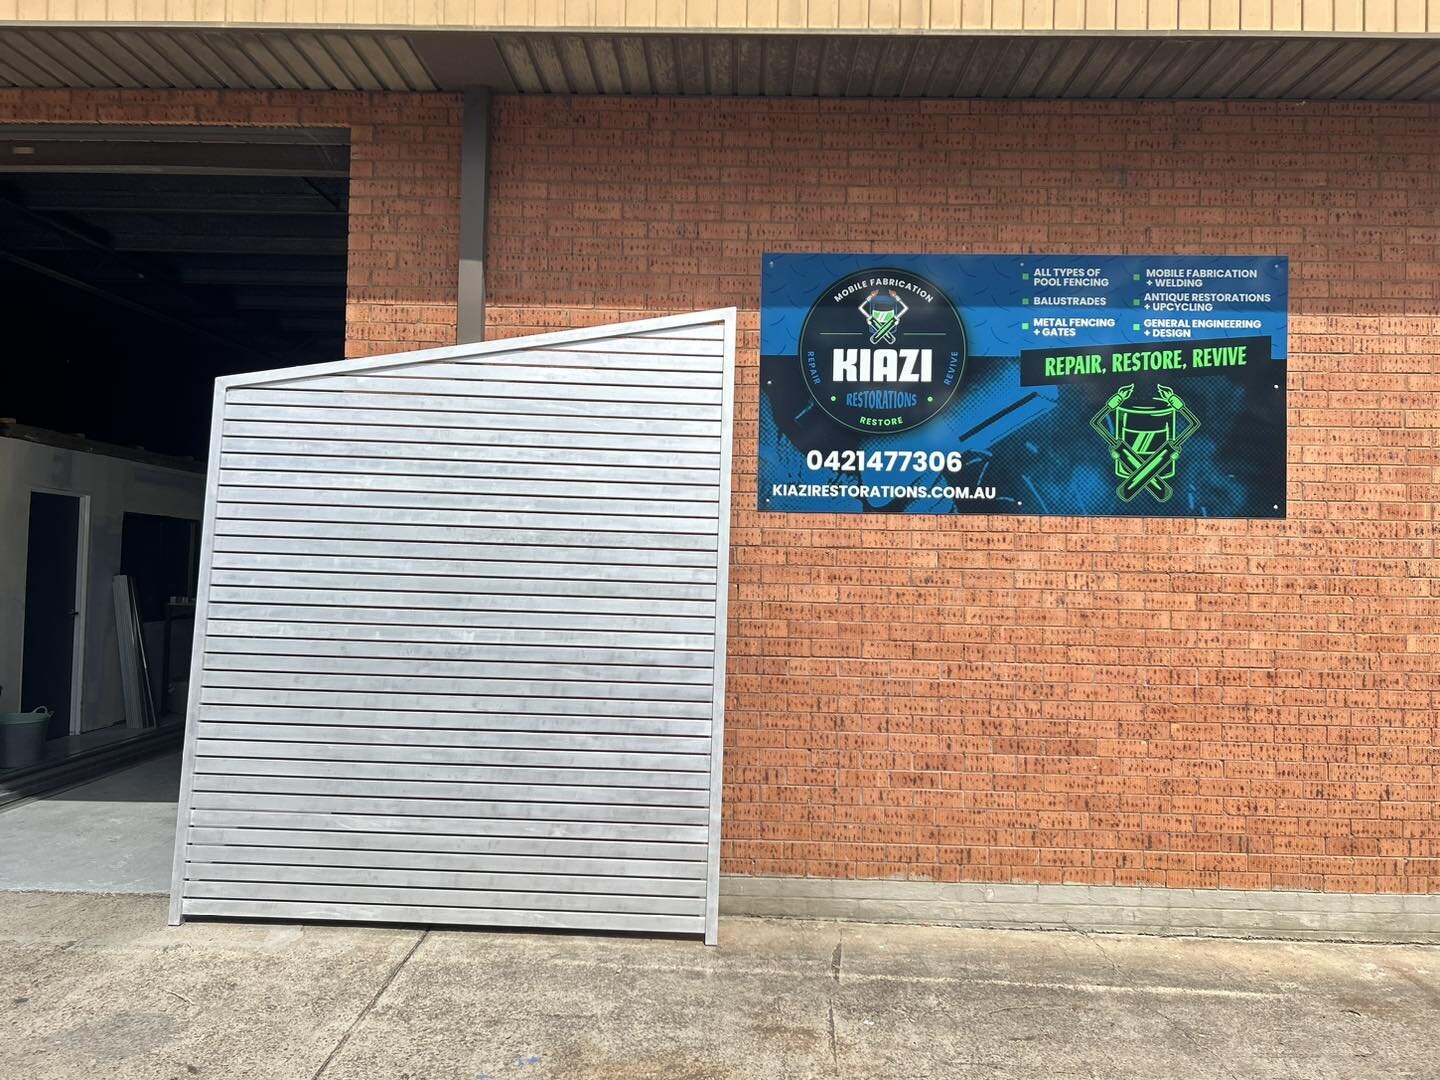 Did you know we build custom privacy screens to suit your needs. We can&rsquo;t wait to see this one powder coated and installed along with a number of custom balustrades that we have fabricated in house.
#customfabrication #welder #fabricator #balus